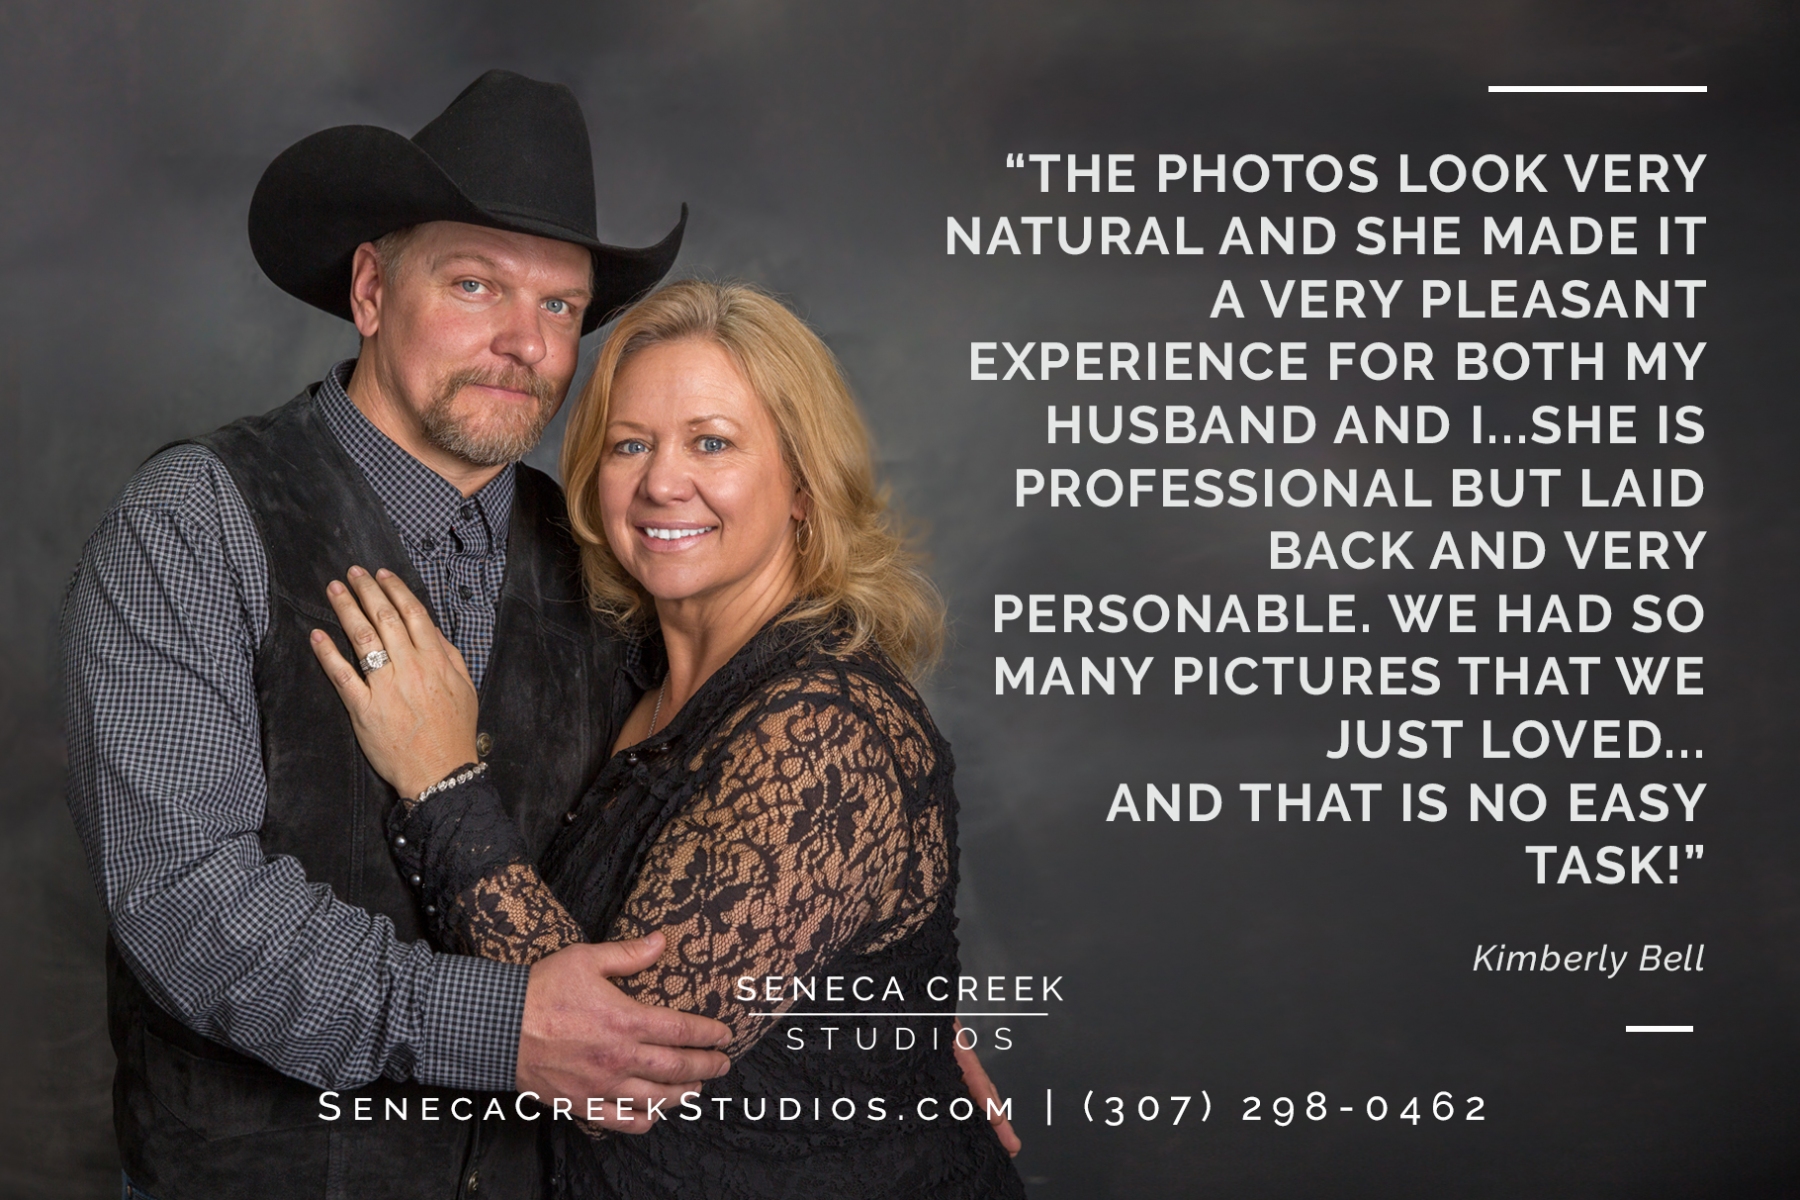 Brad and Kimberly Bell Couples Portrait Photography Testimonial Review, Historic Downtown Laramie, Wyoming | SenecaCreekStudios.com by Allison Pluda | Professional Portrait & Headshot Photography Studio | Families, Couples, High School & College Seniors, Dogs, Pets, Best Friends, Sisters, Mothers, Engagement, Businesses, Groups, Bands, & Custom Designed Portrait Photography Sessions | Archival, Unique, Heirloom Prints & Gifts | Seneca Creek Studios Art Gallery, Portrait, & Design Studio in historic downtown Laramie, Wyoming also serving Cheyenne, Fort Collins, and the Front Range of Northern Colorado | Kimberly Bell Professional Realtor Headshot and Brad Bell couples portrait photography in Laramie, Wyoming | 2018-05-04-Kimberly-Bell-Portrait-Photography-Testimonial | cowboy rural and western photography for Centennial, Wyoming